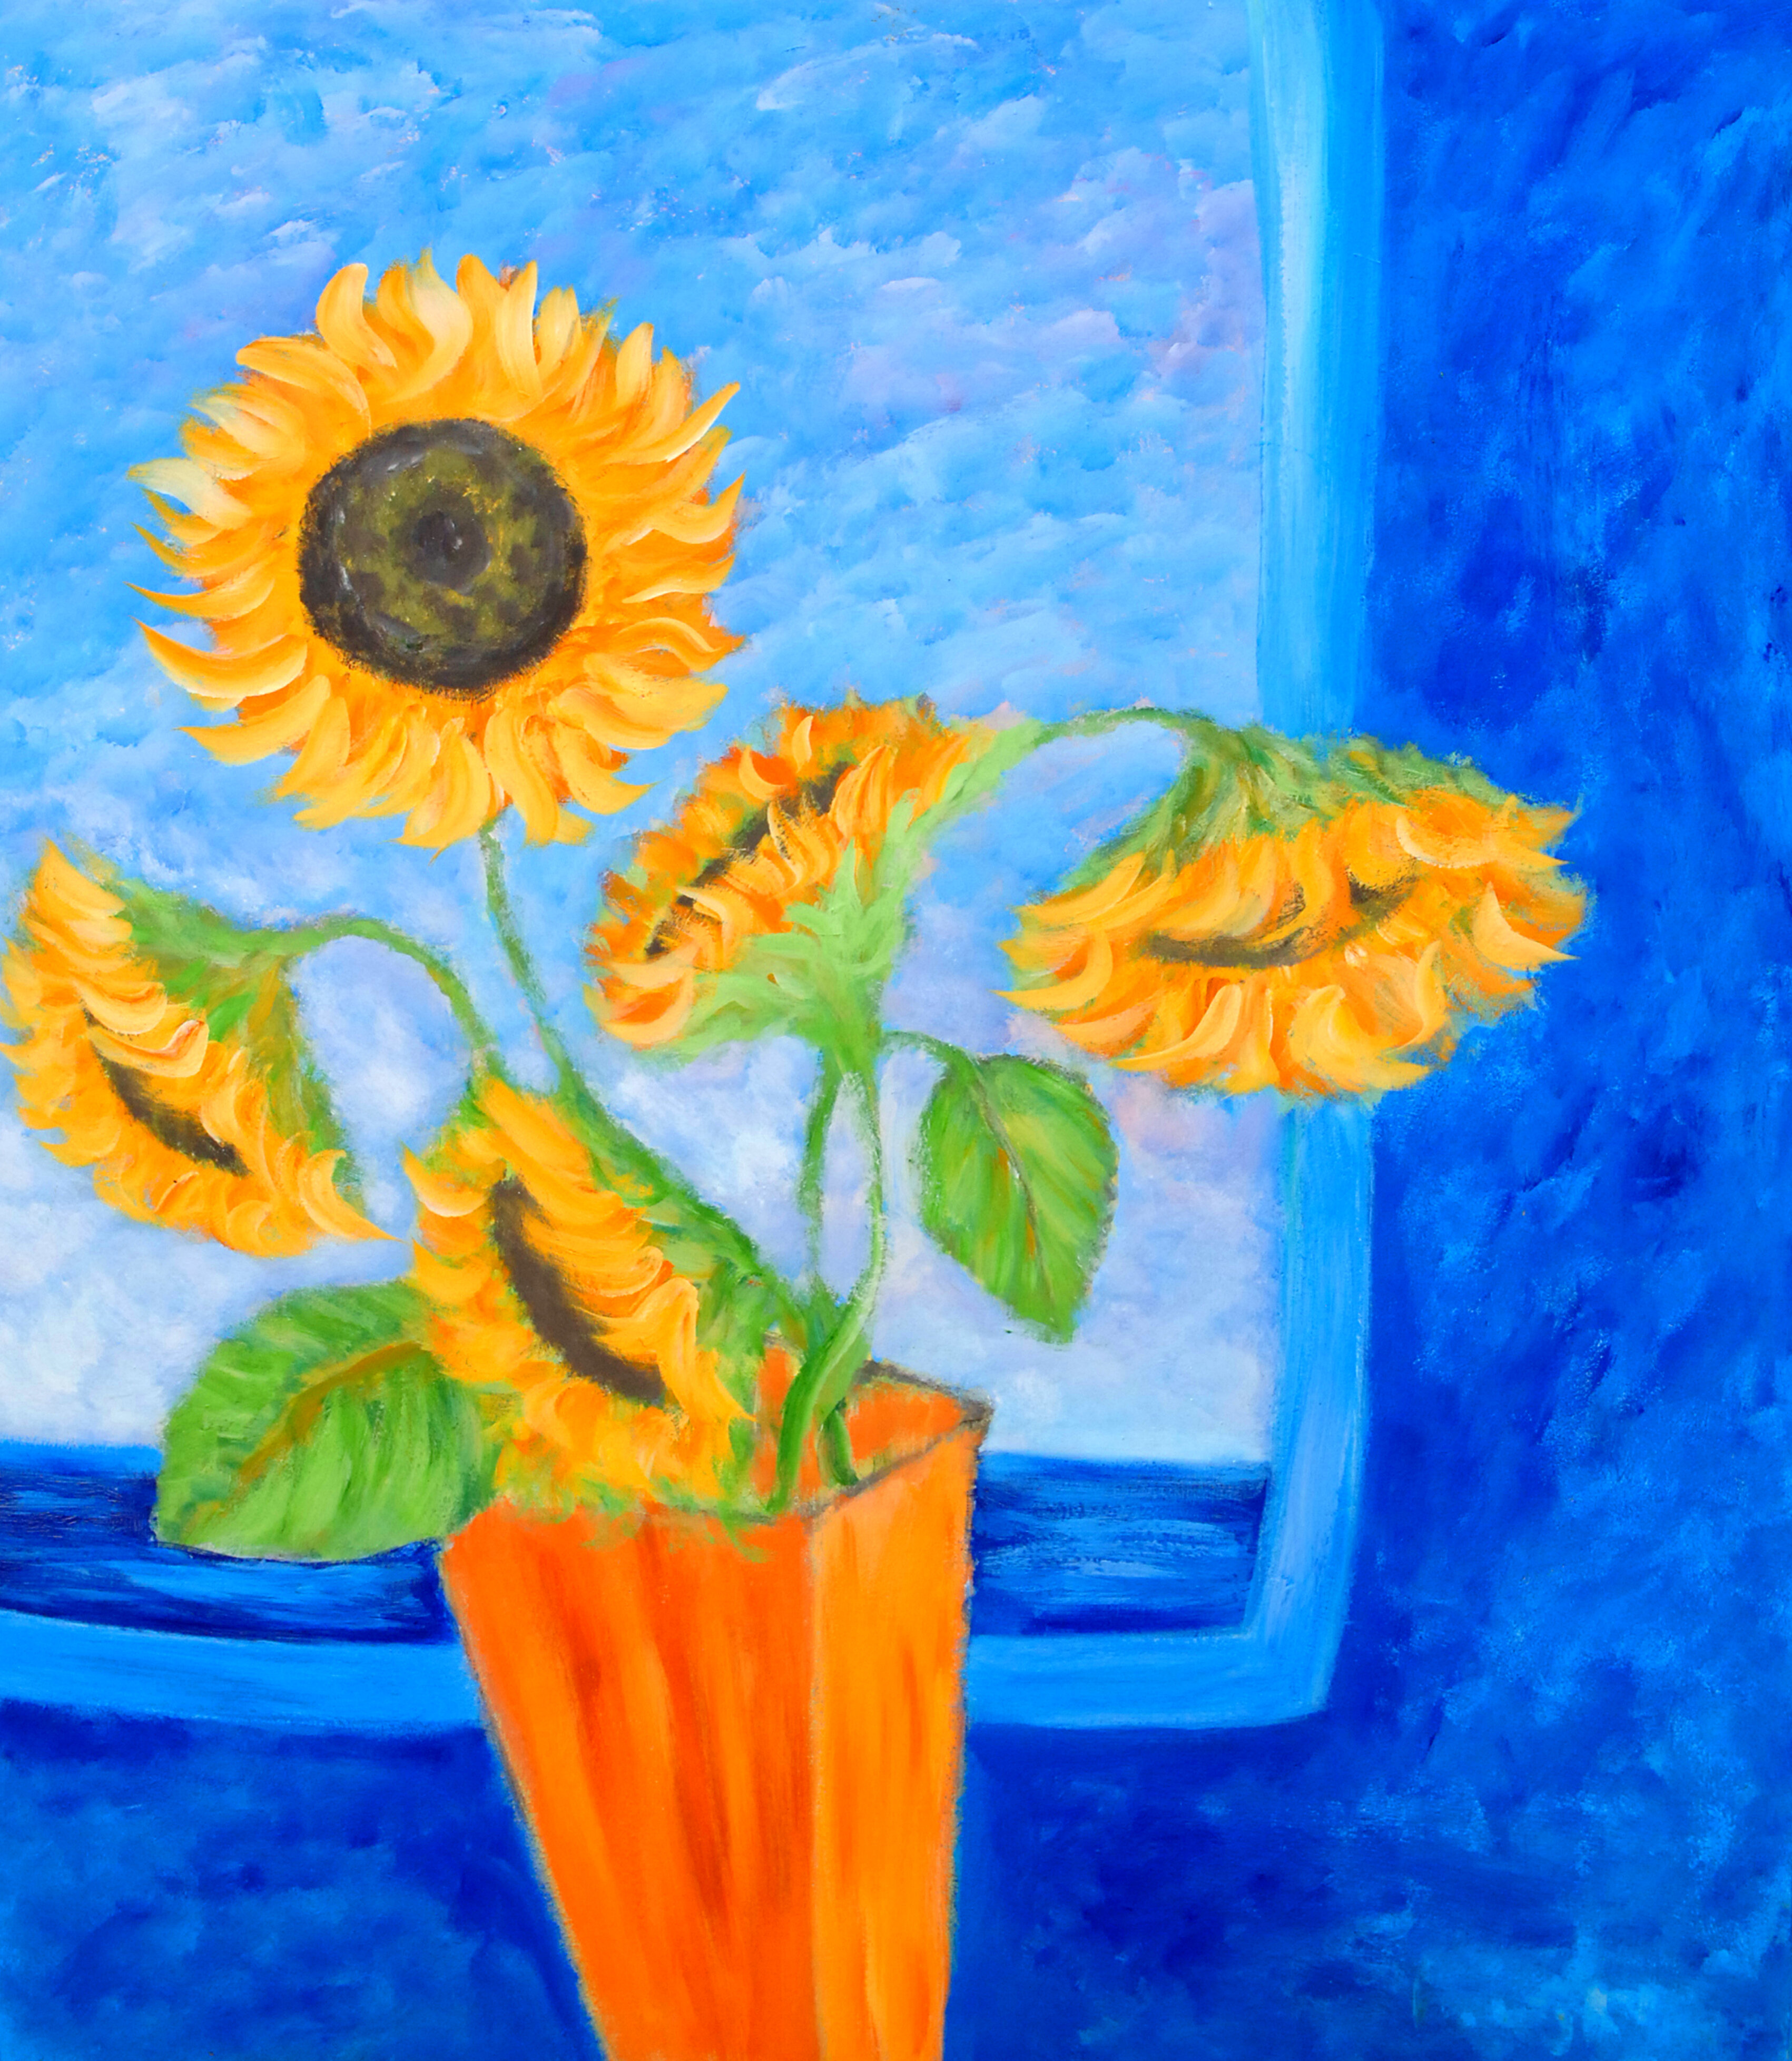 Sunflowers on black gesso - Acrylic on canvas, in Recent Artwork